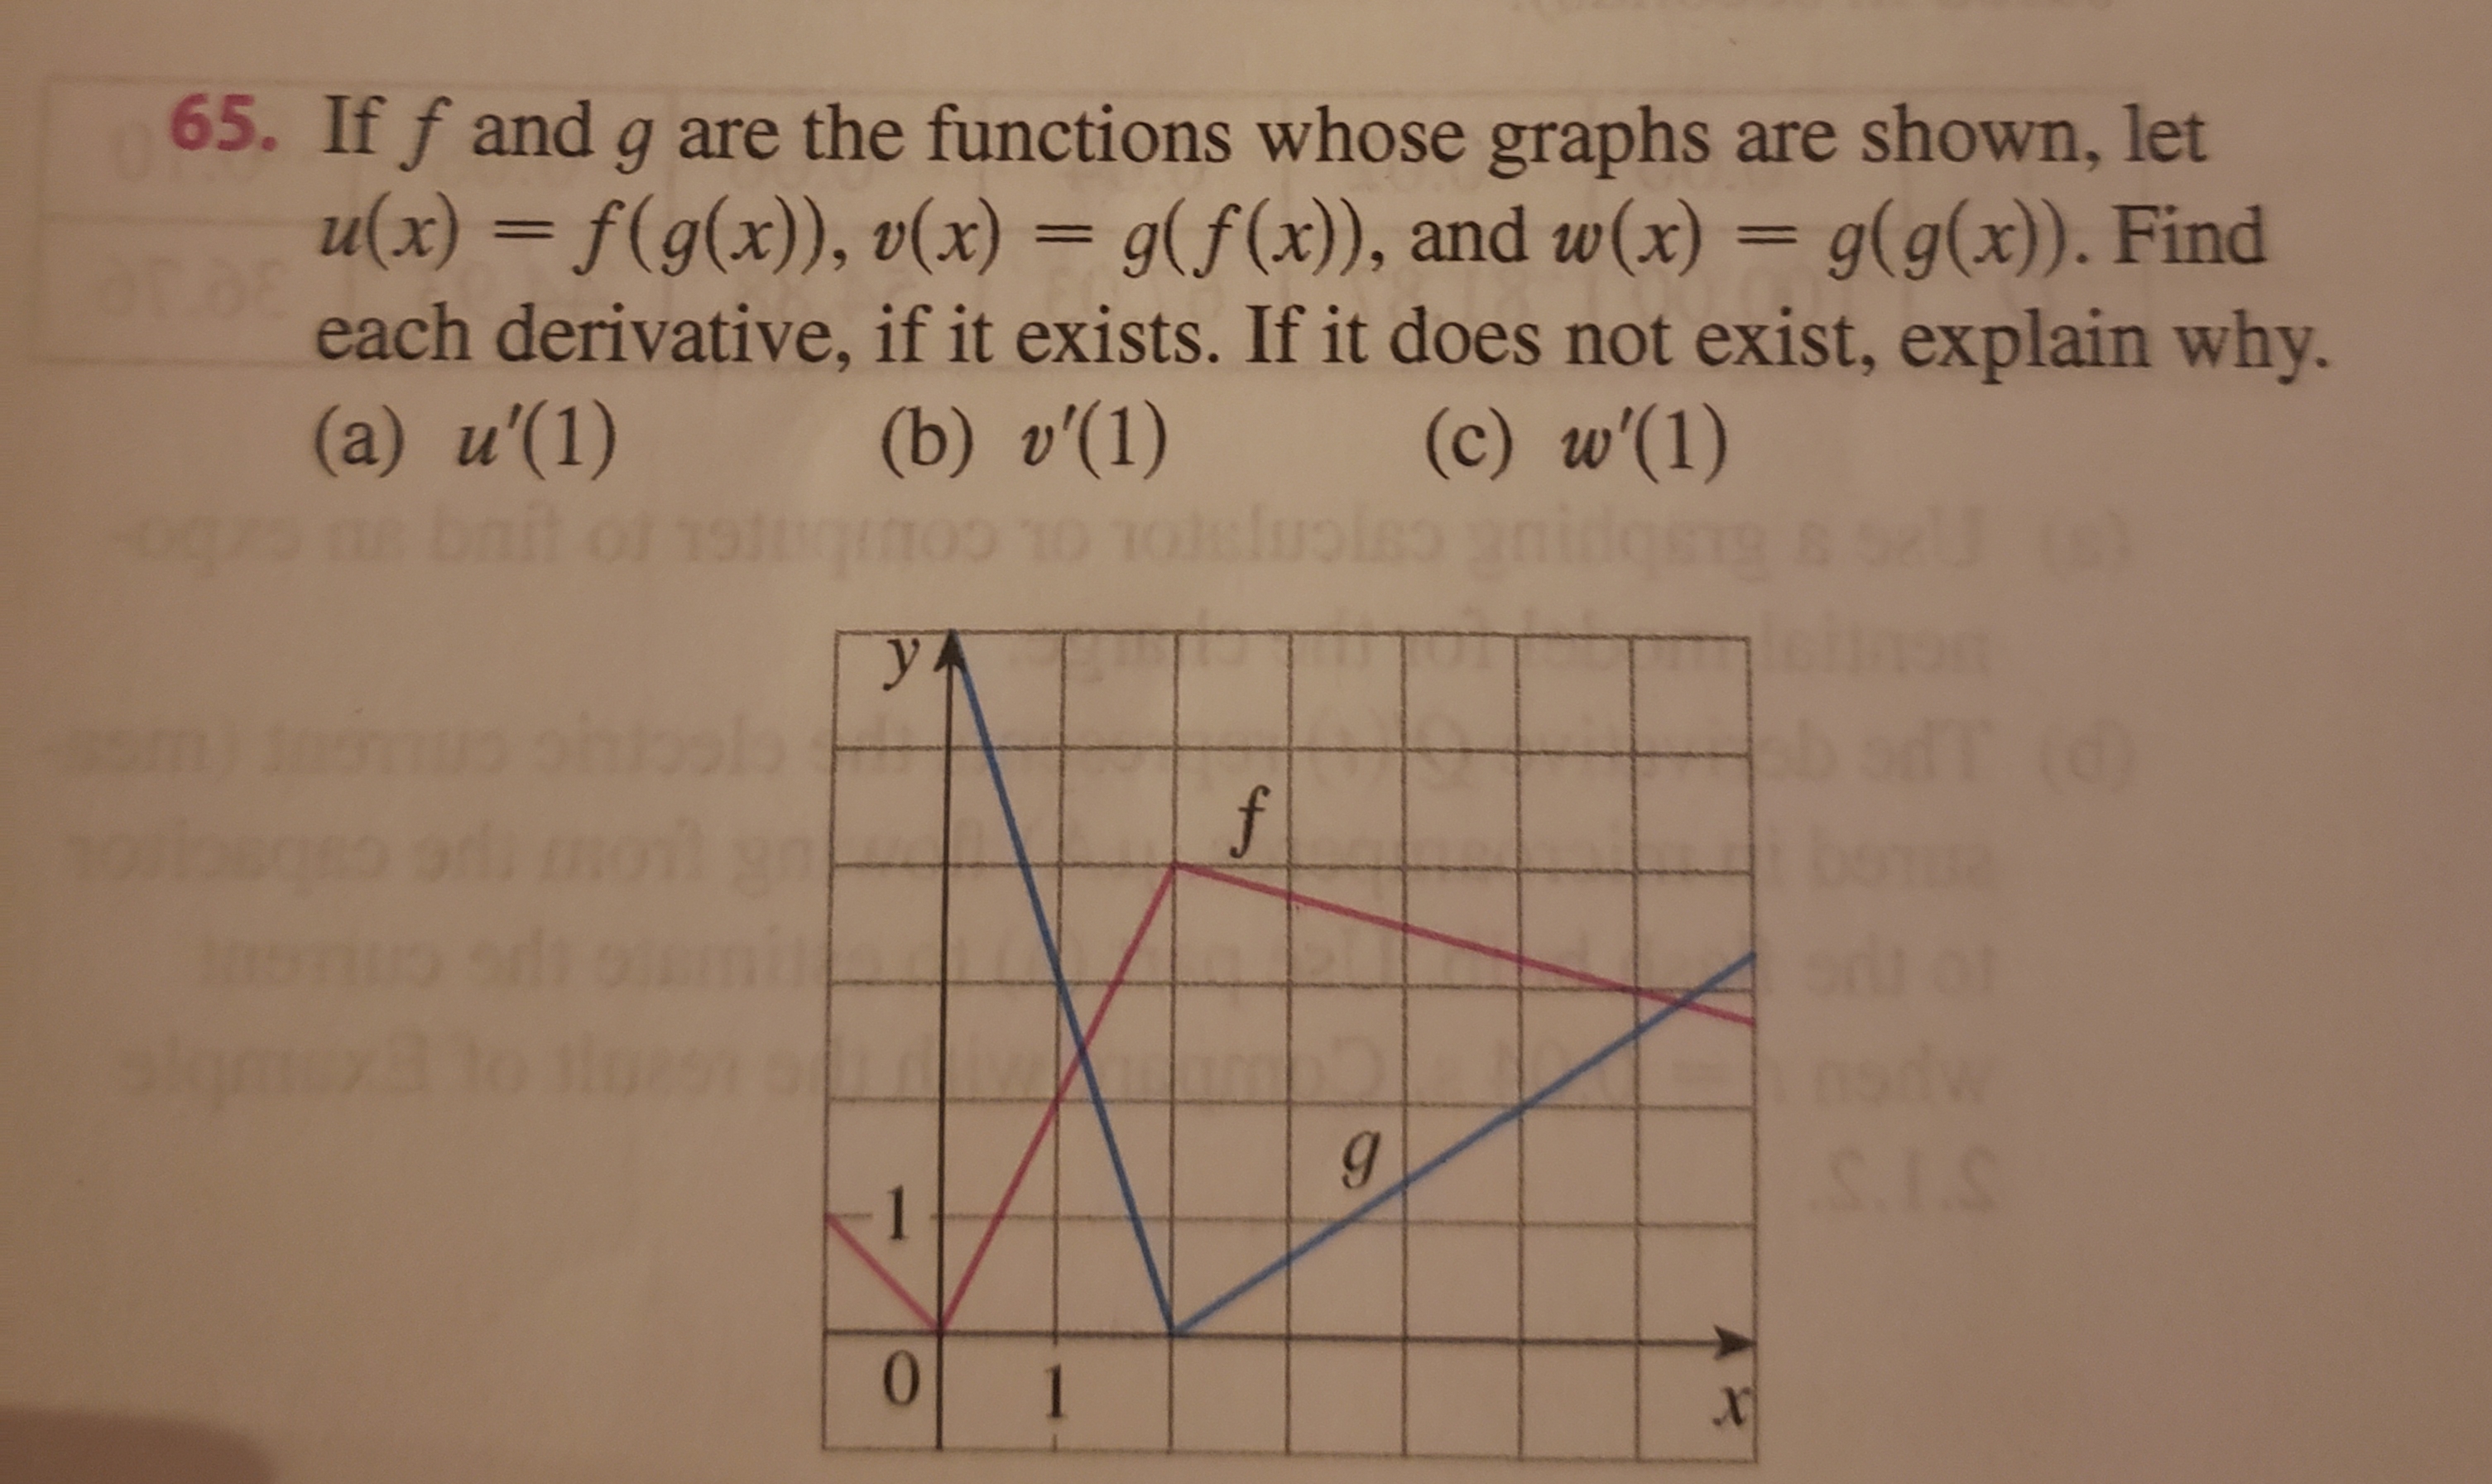 65. If f and g are the functions whose graphs are shown, let
Mx
g(x)), v(x) = g(f(x)), and w (x) = g(g(x)). Find
each derivative, if it exists. If it does not exist, explain why.
(a) и'(1)
(b) v'(1)
(c) w'(1)
у
SI.S
0
1
x
